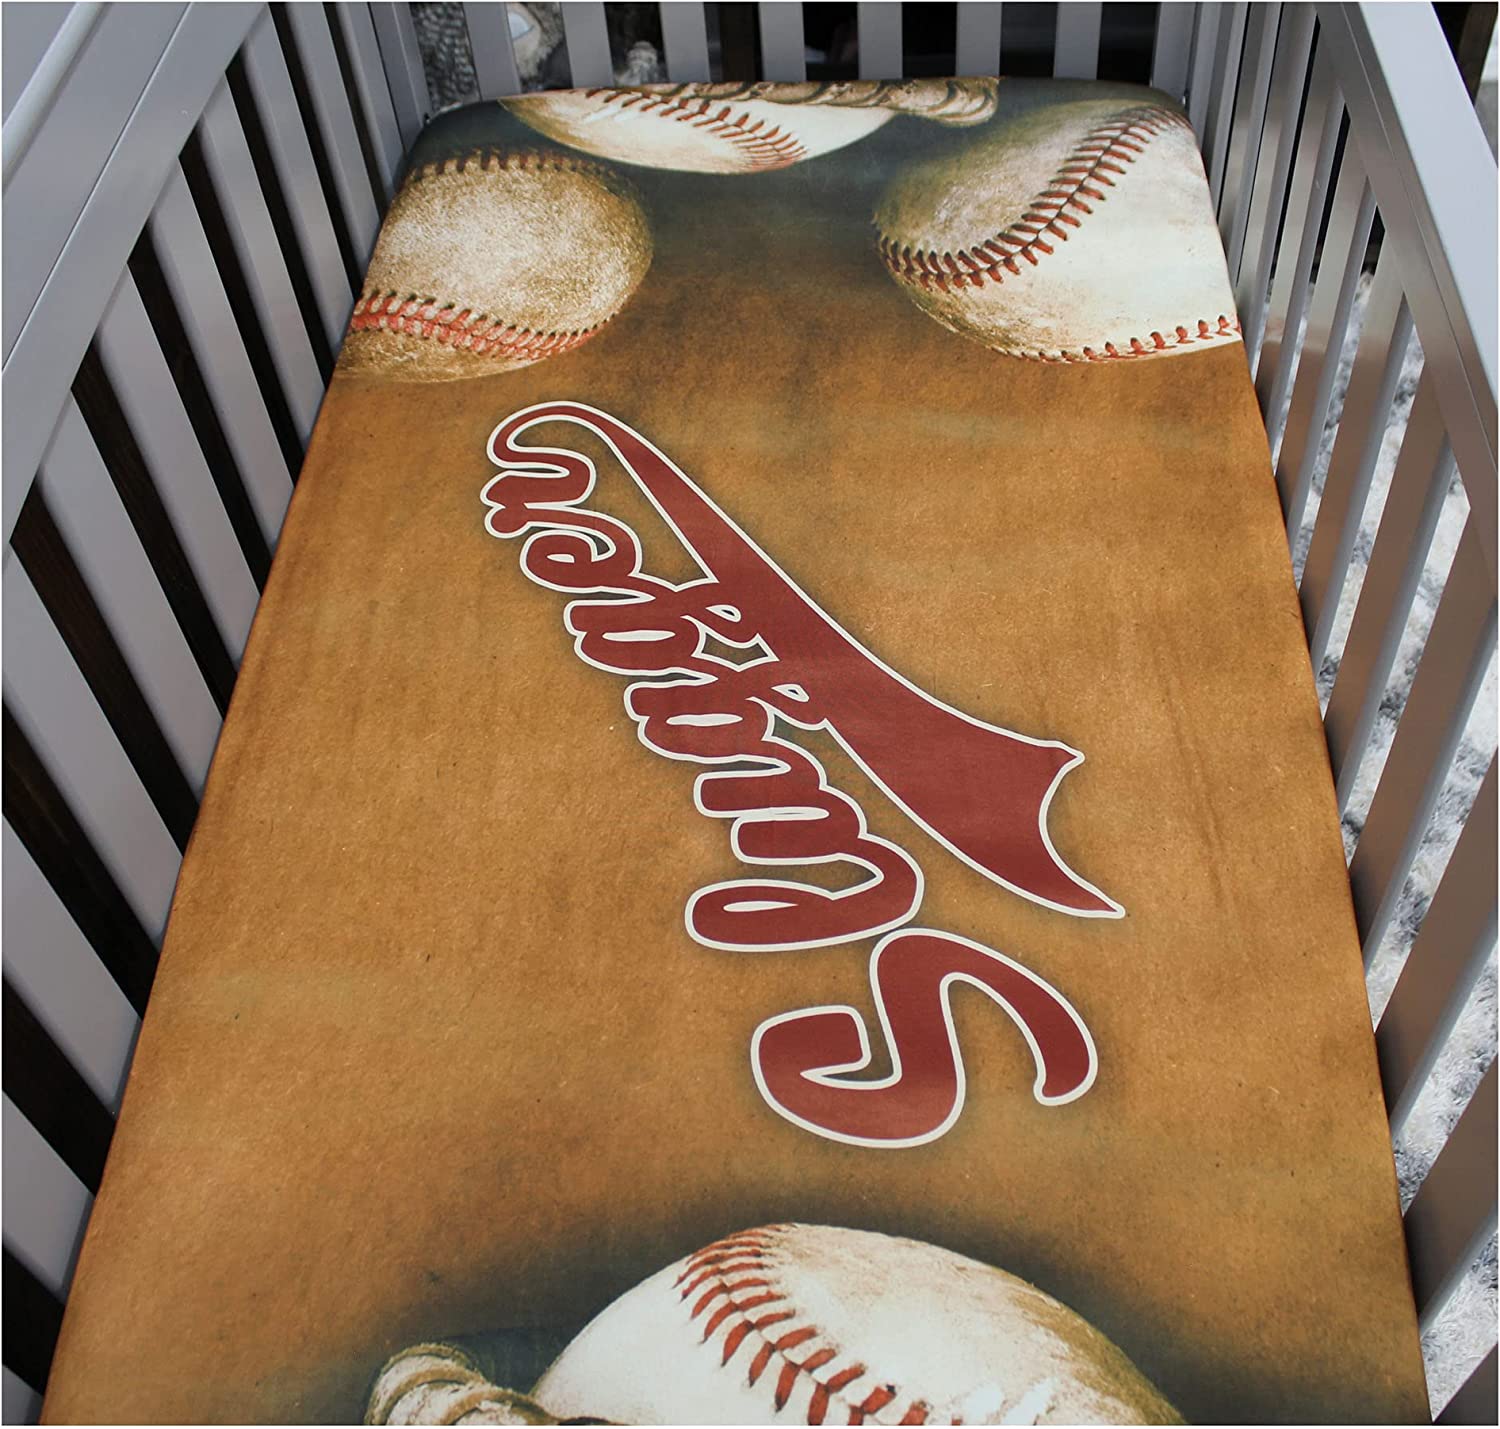 Dear Baby Gear Deluxe Crib Sheet Cotton Polyester Crib Sheets – Slugger Baseball Glove and Baseballs on Brown Print, Exclusive Print, 28 x 52 x 10 Inches